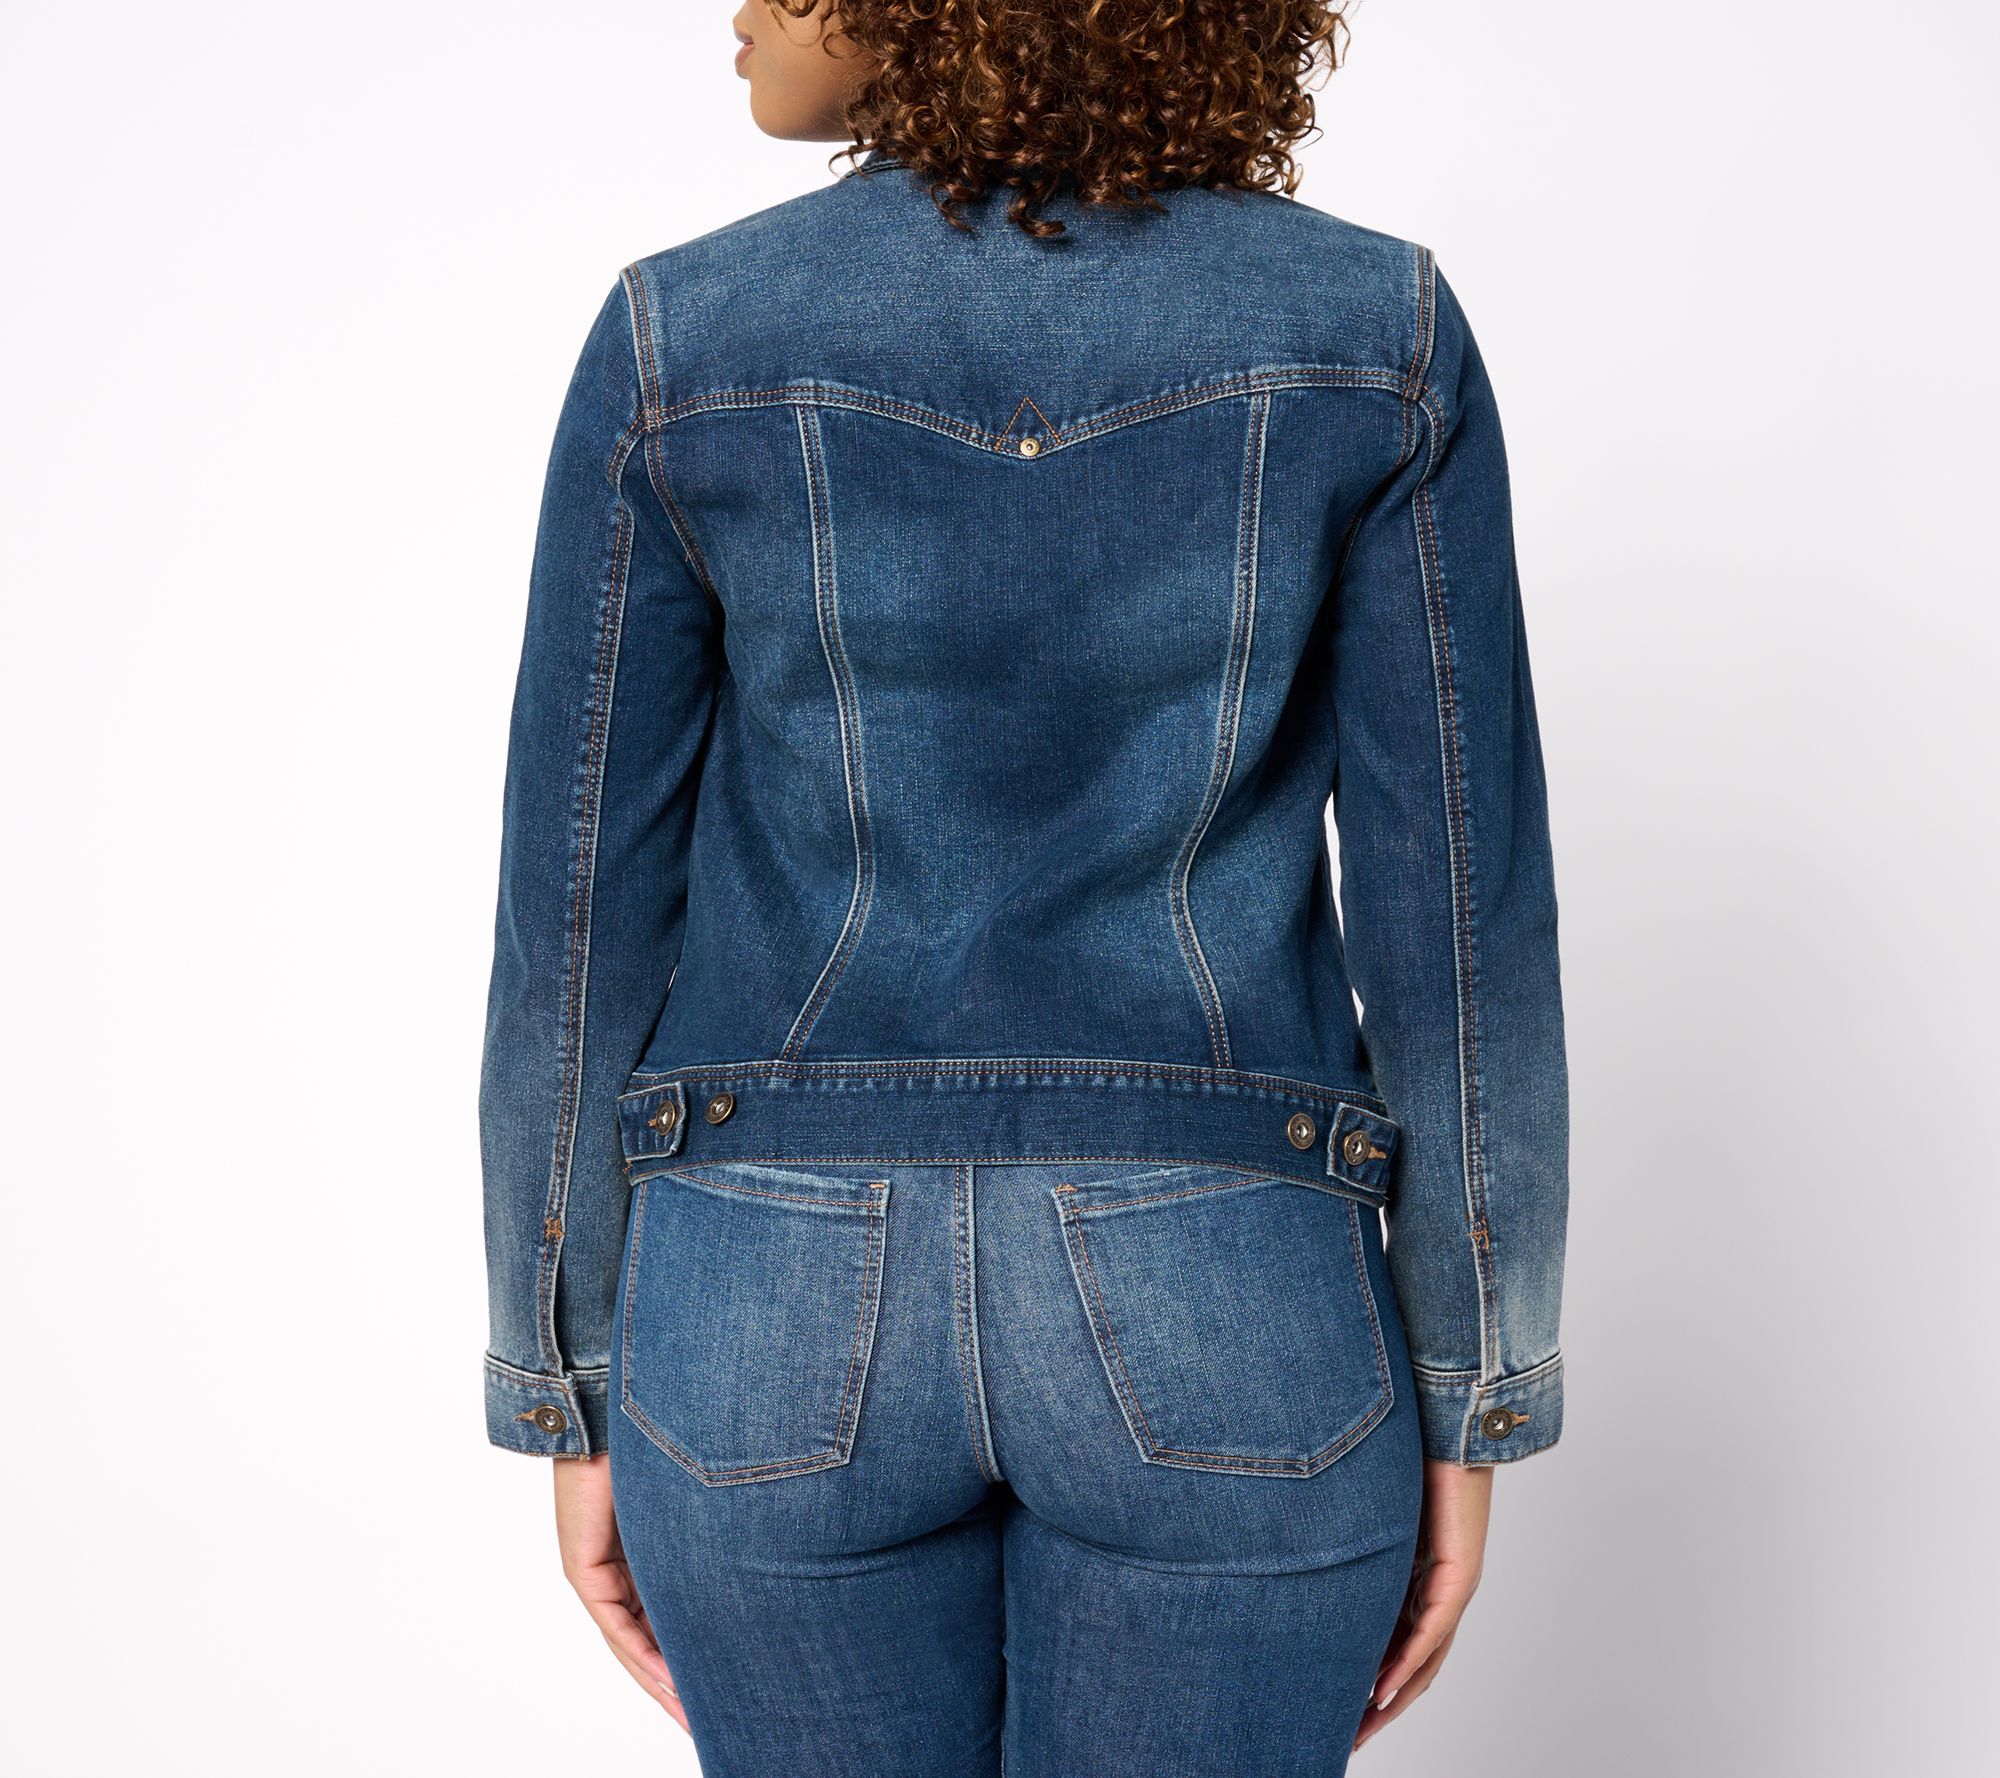 LVPL by Liverpool Jean Jacket - Waterfront - QVC.com